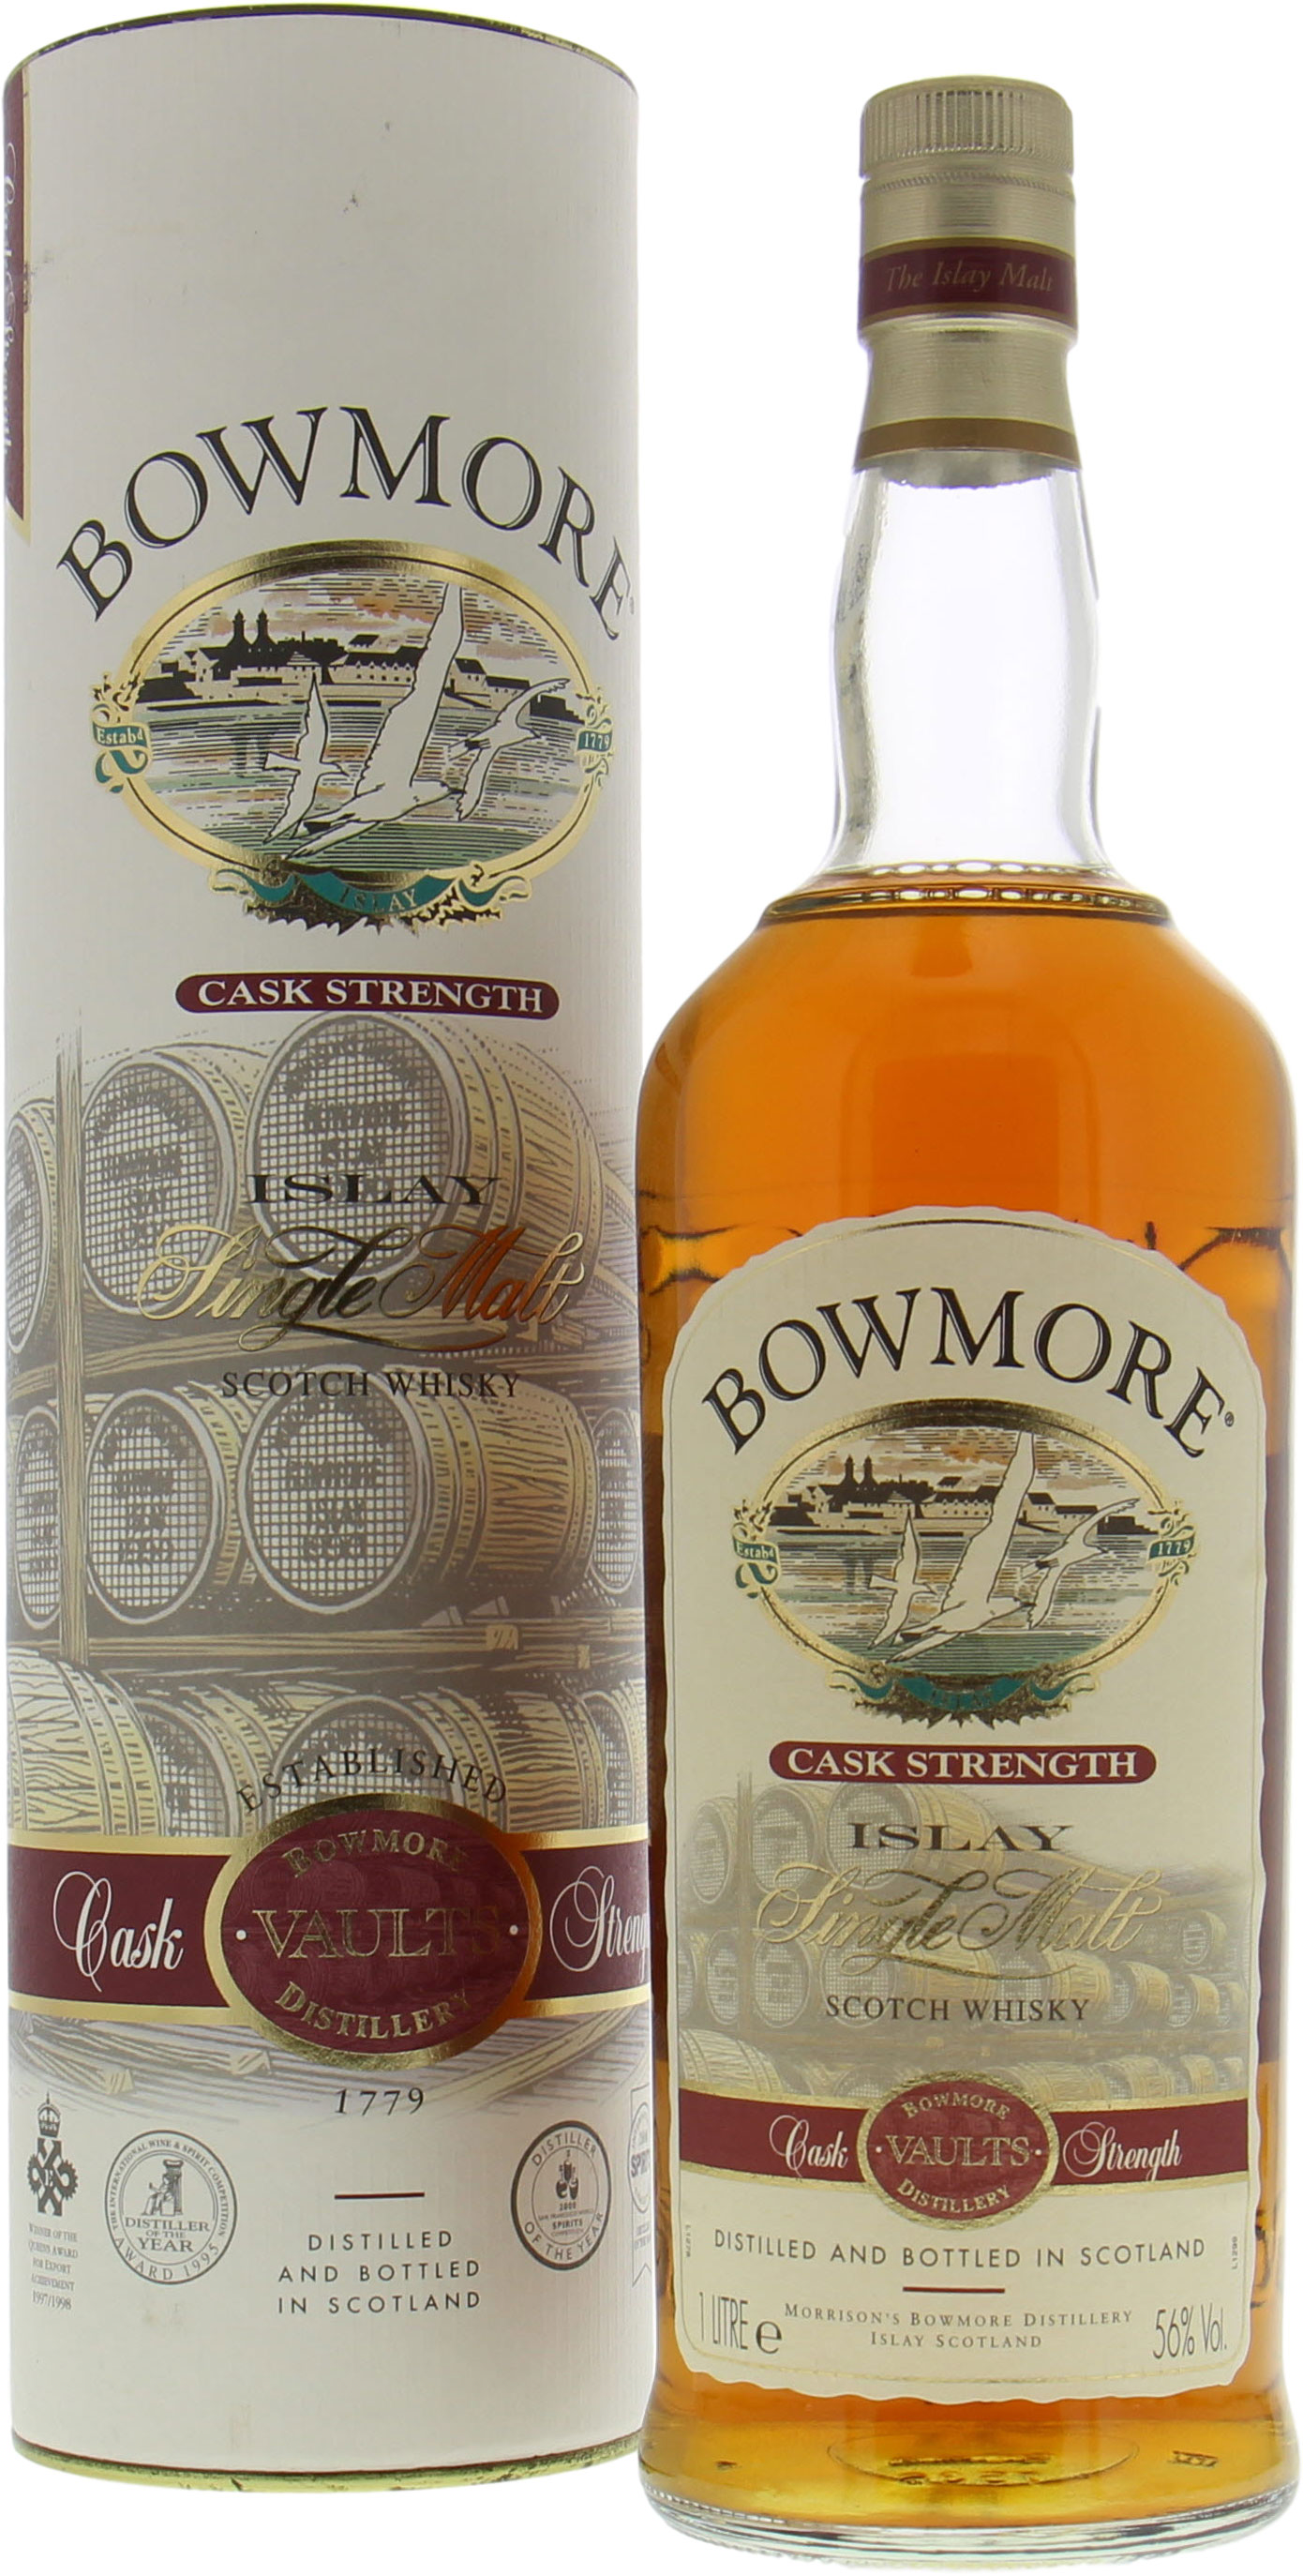 Bowmore - Cask Strength Old Vitage Label 56% NV